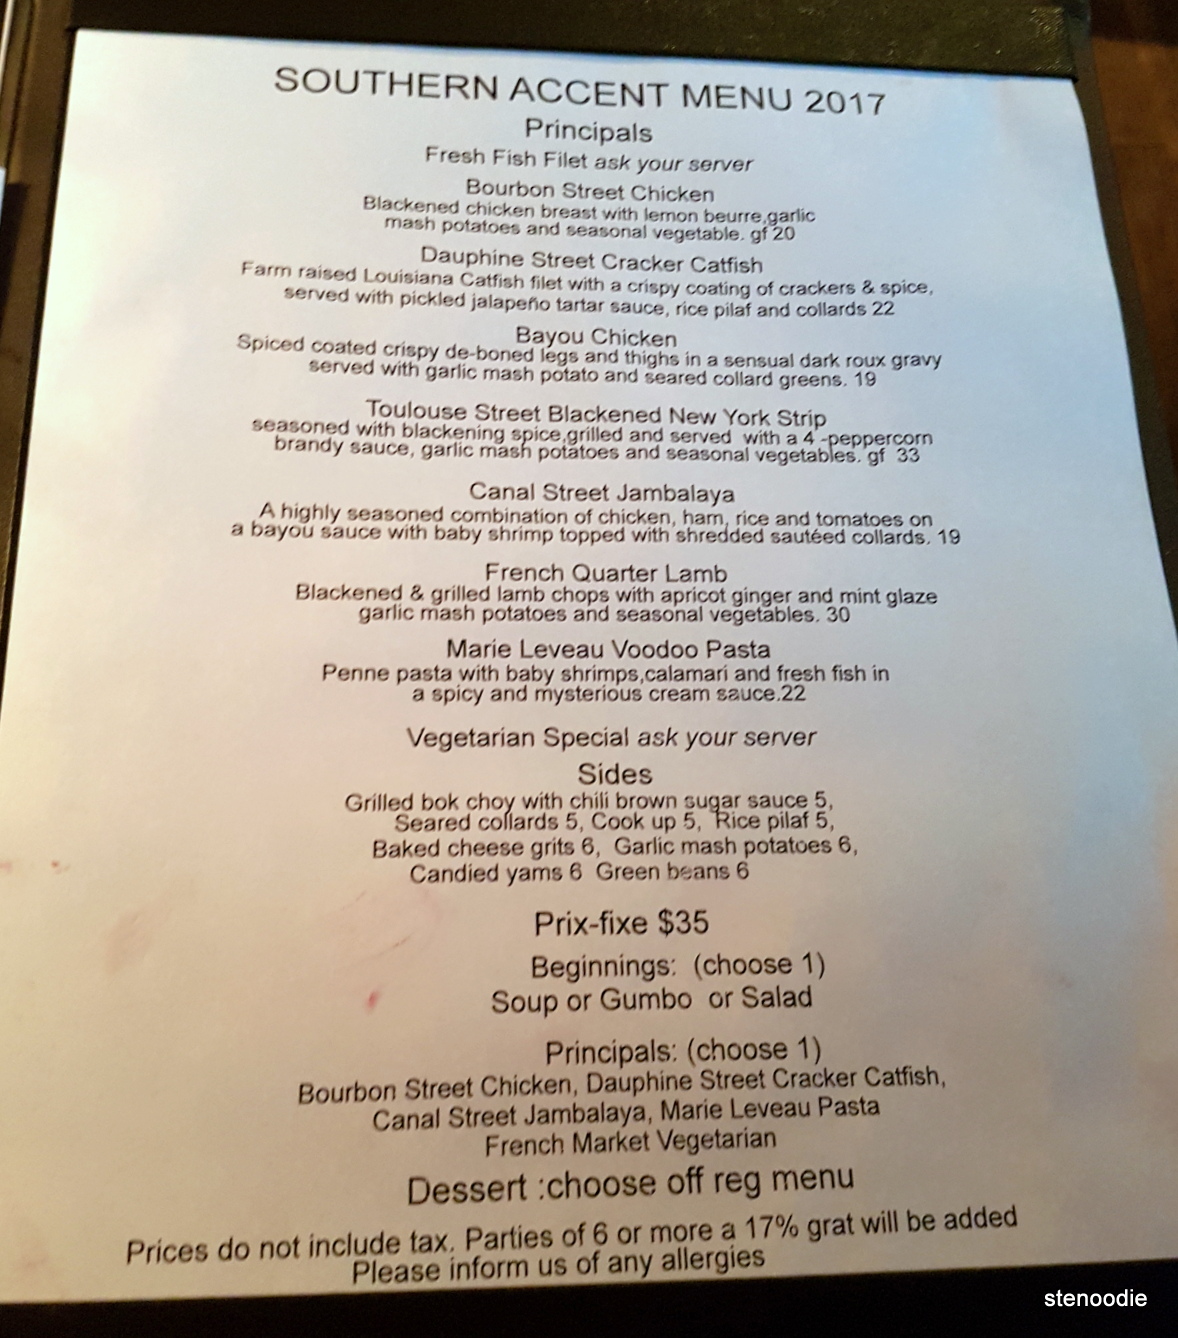 Southern Accent menu and prices 2017